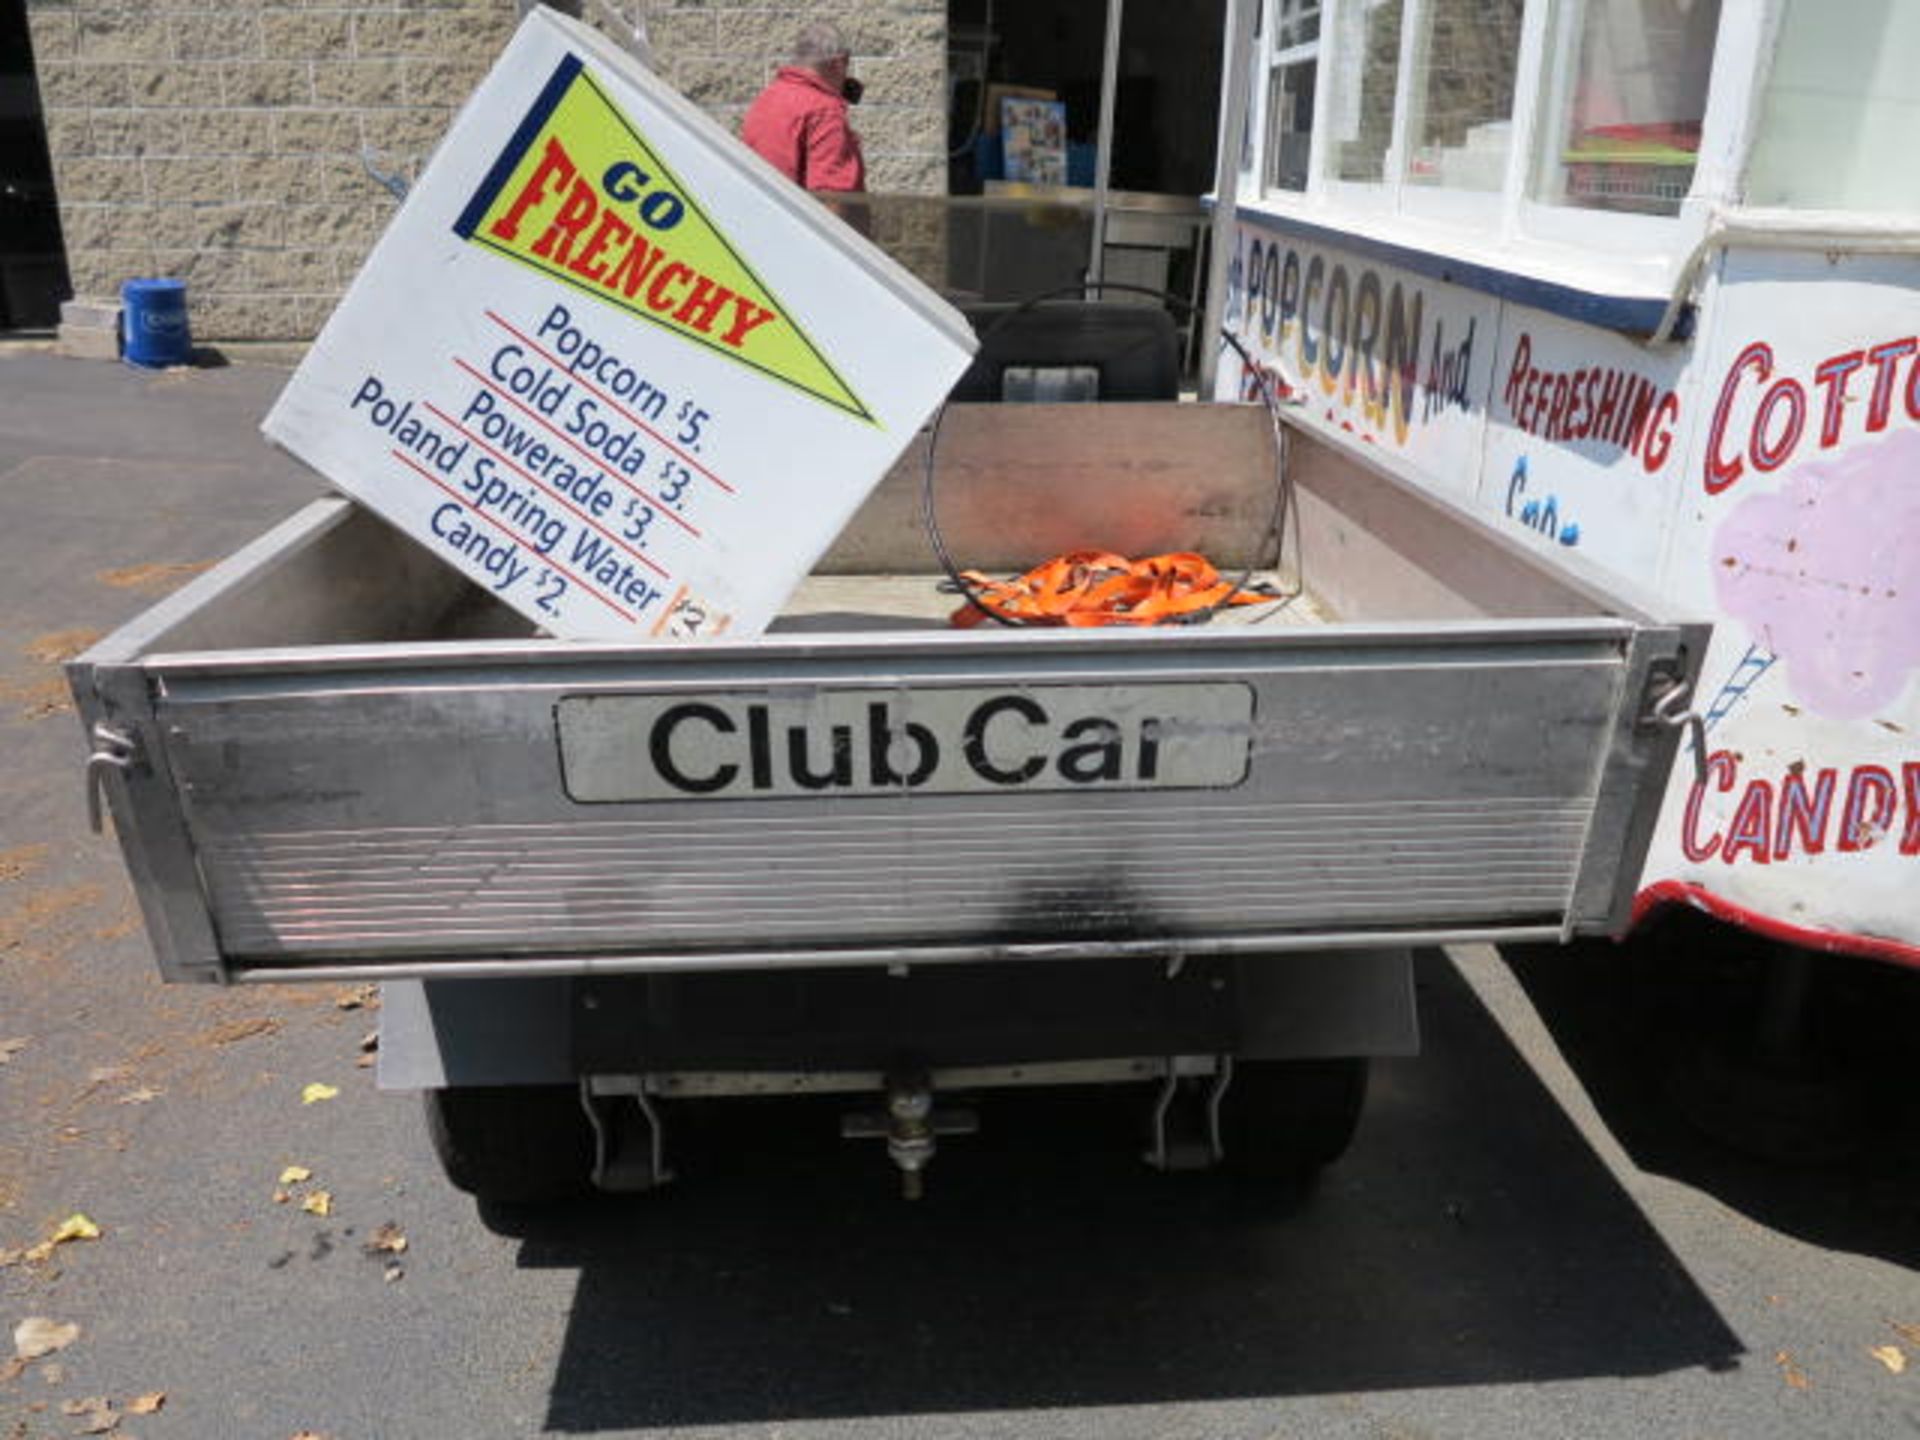 Club Car Carry All II Golf Cart with Dump Trailer including additional Canopy and Beverage Cart - Image 2 of 5